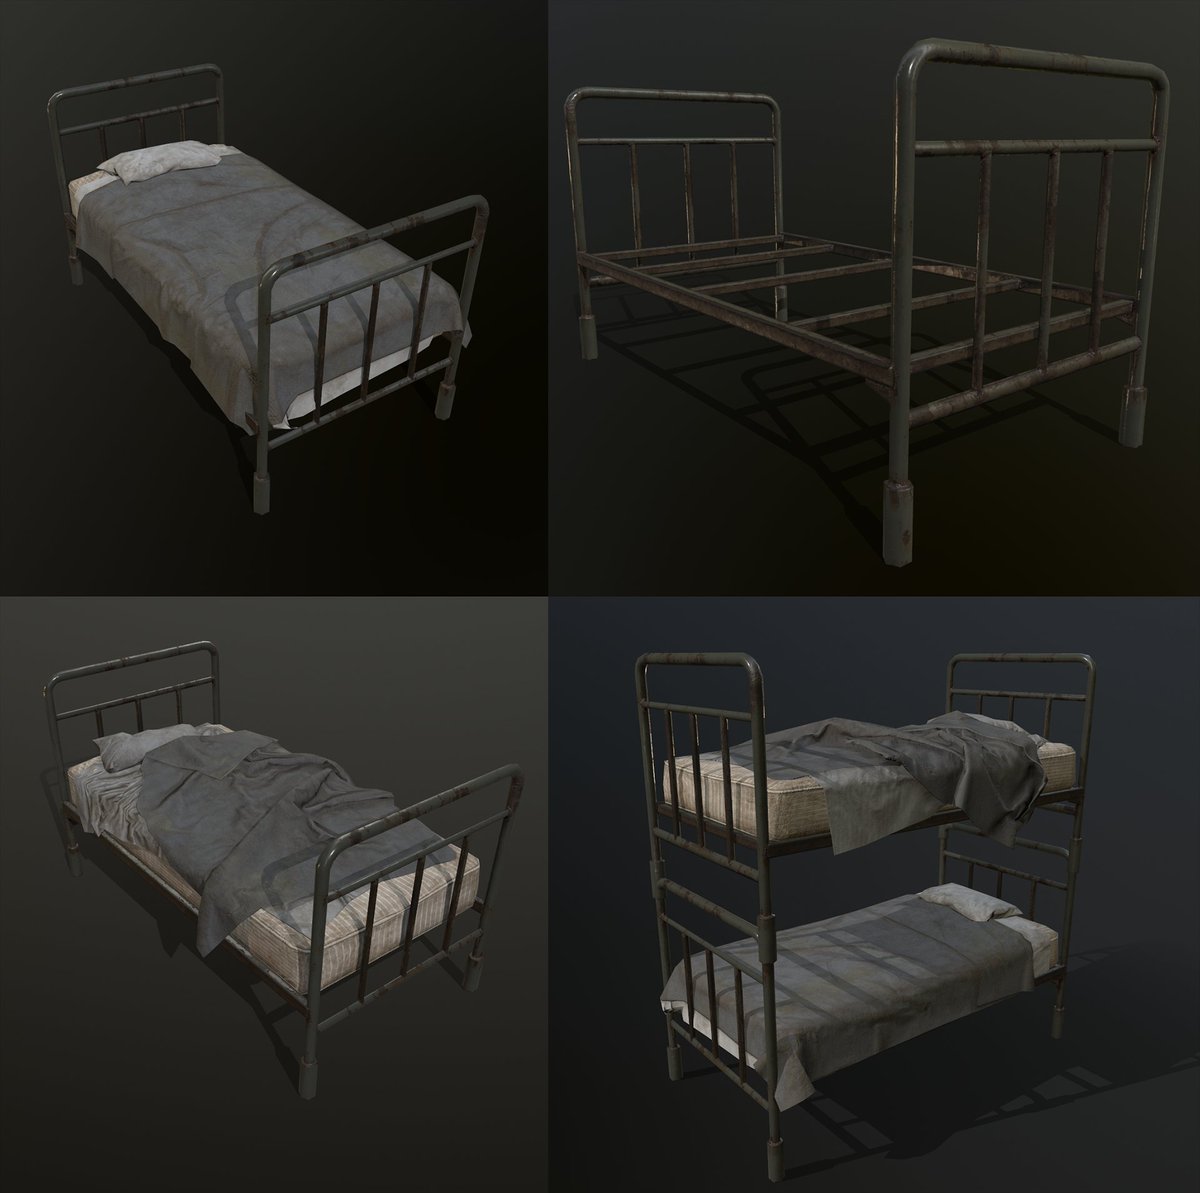 7 Days To Die Official On Twitter New Bed And Mattress Models